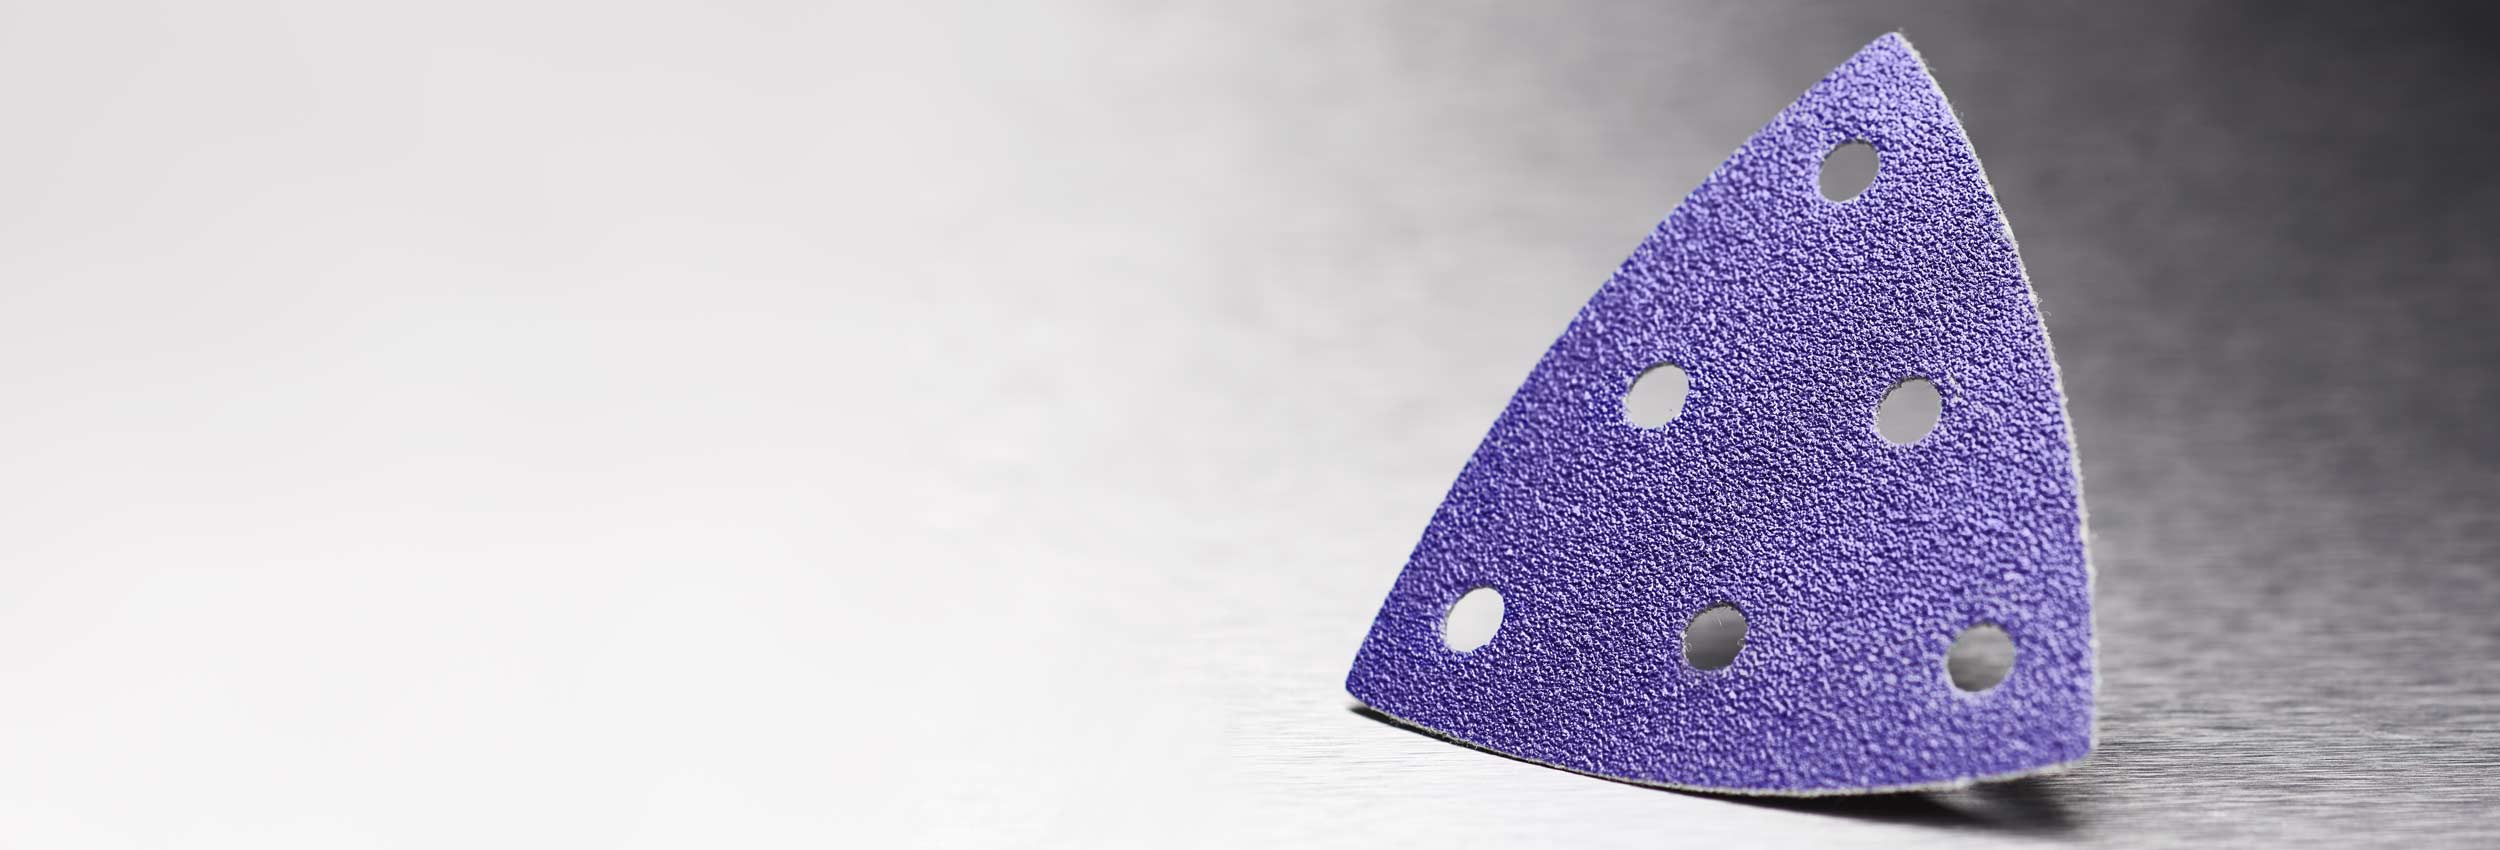 Ceramic high-performance abrasive for interior work projects